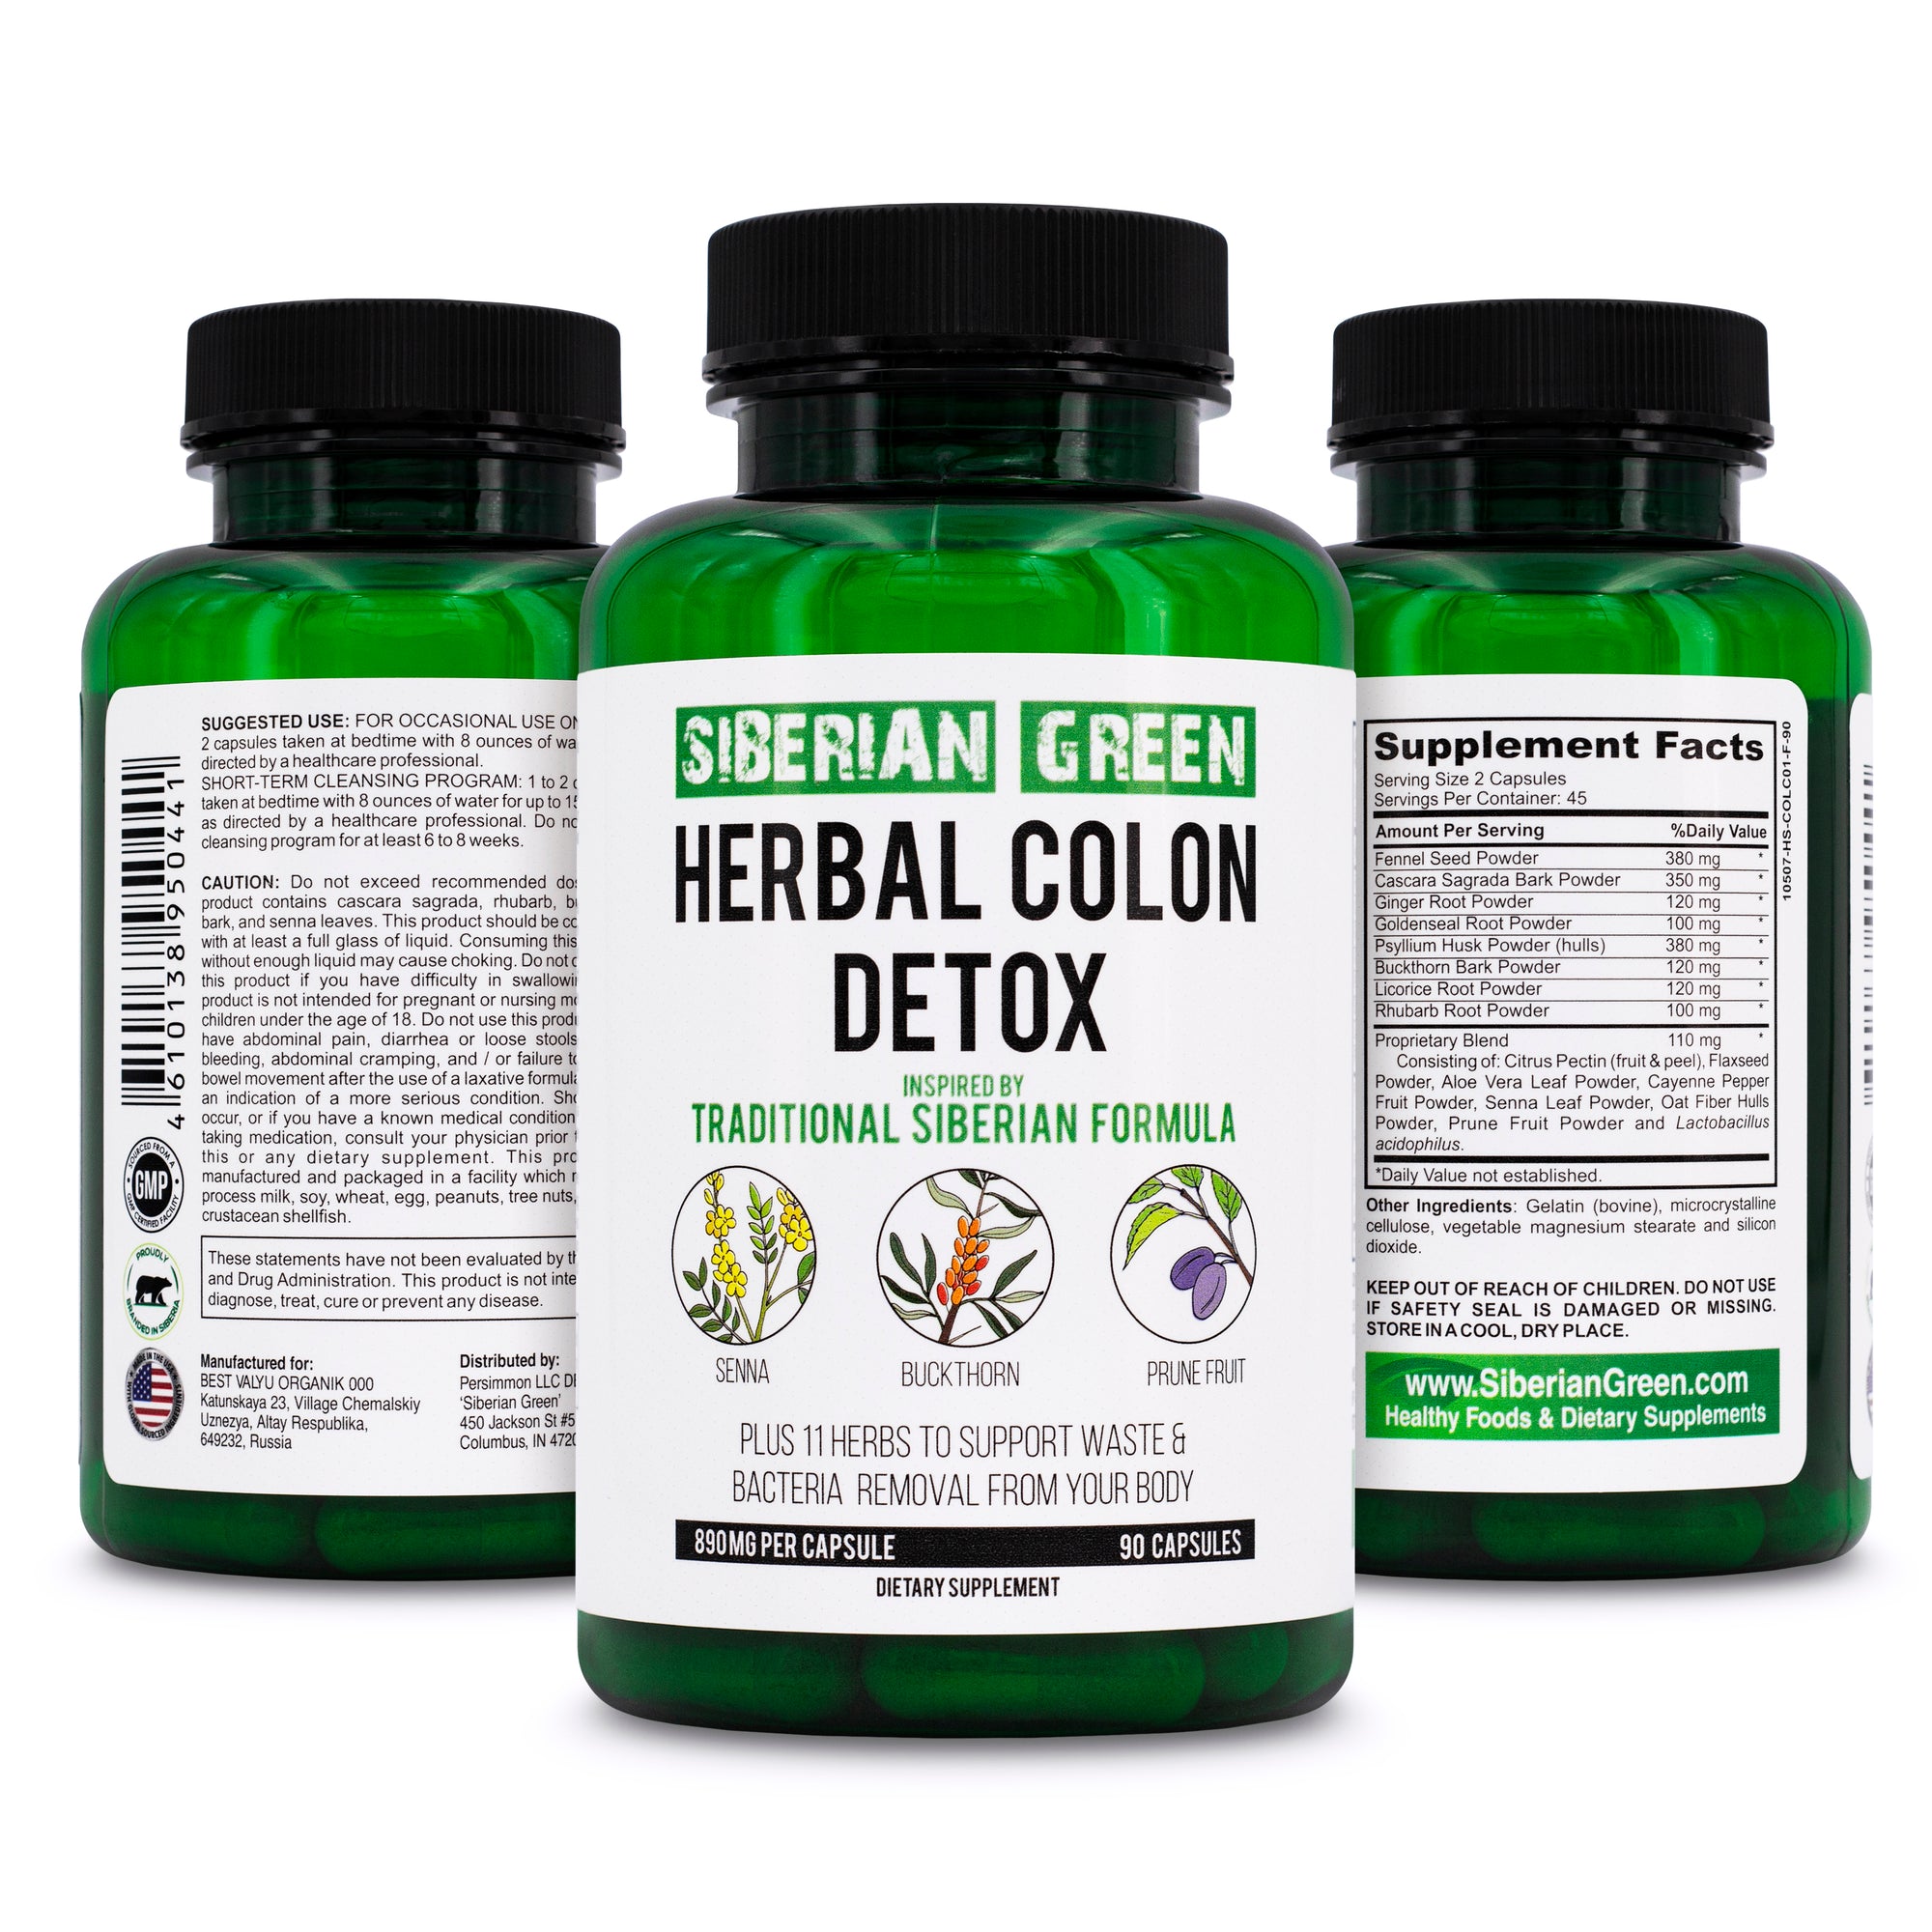 What are the best herbs for colon detox?